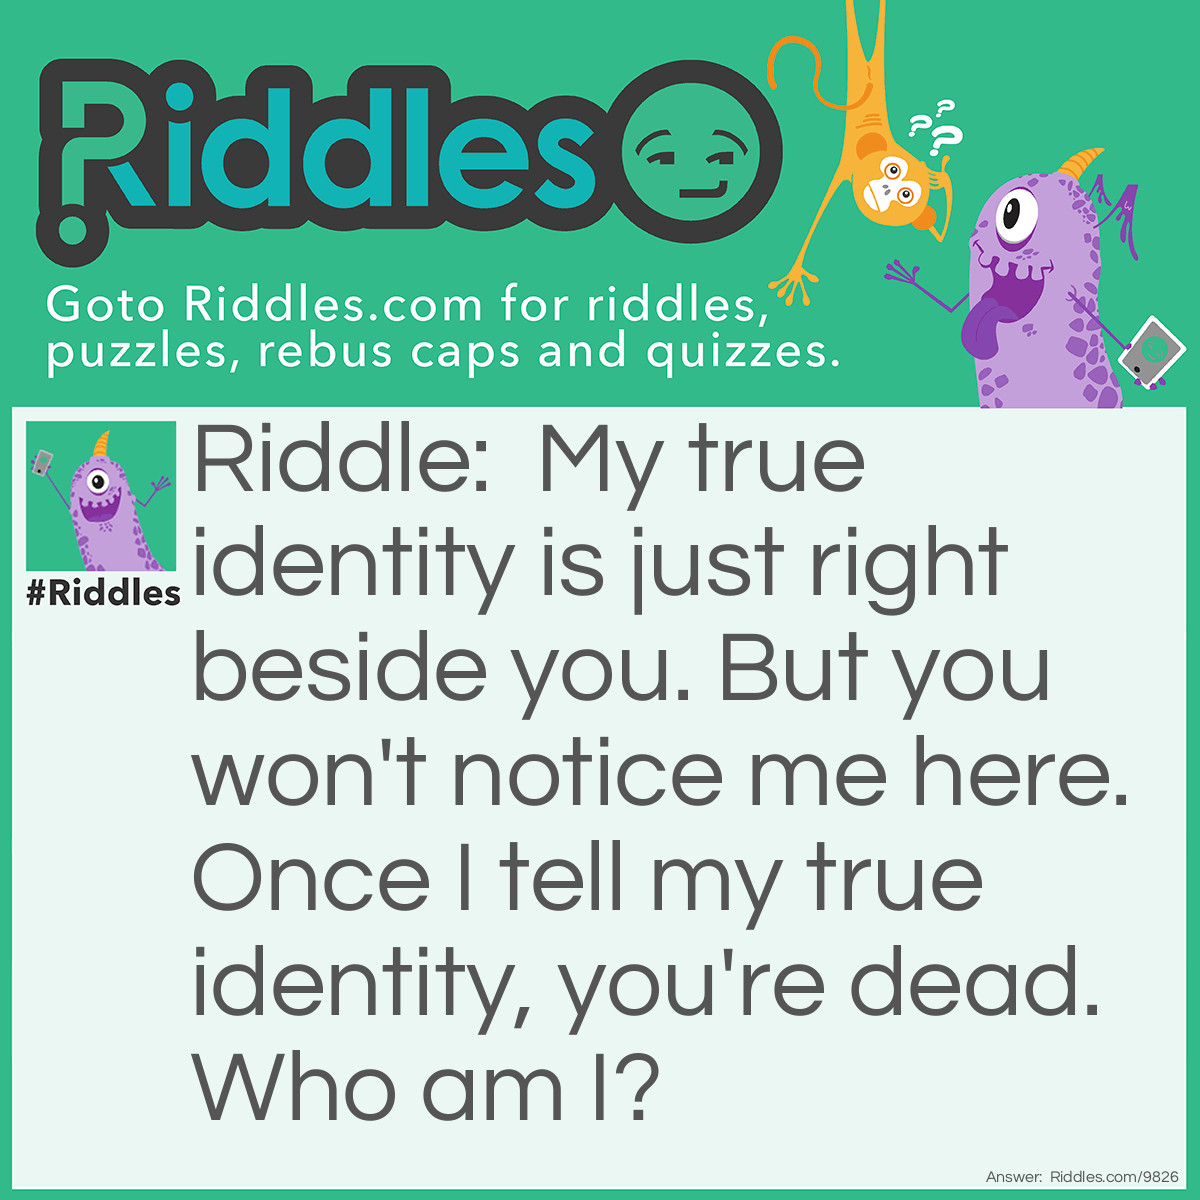 Riddle: My true identity is just right beside you. But you won't notice me here. Once I tell my true identity, you're dead. Who am I? Answer: Traitor.